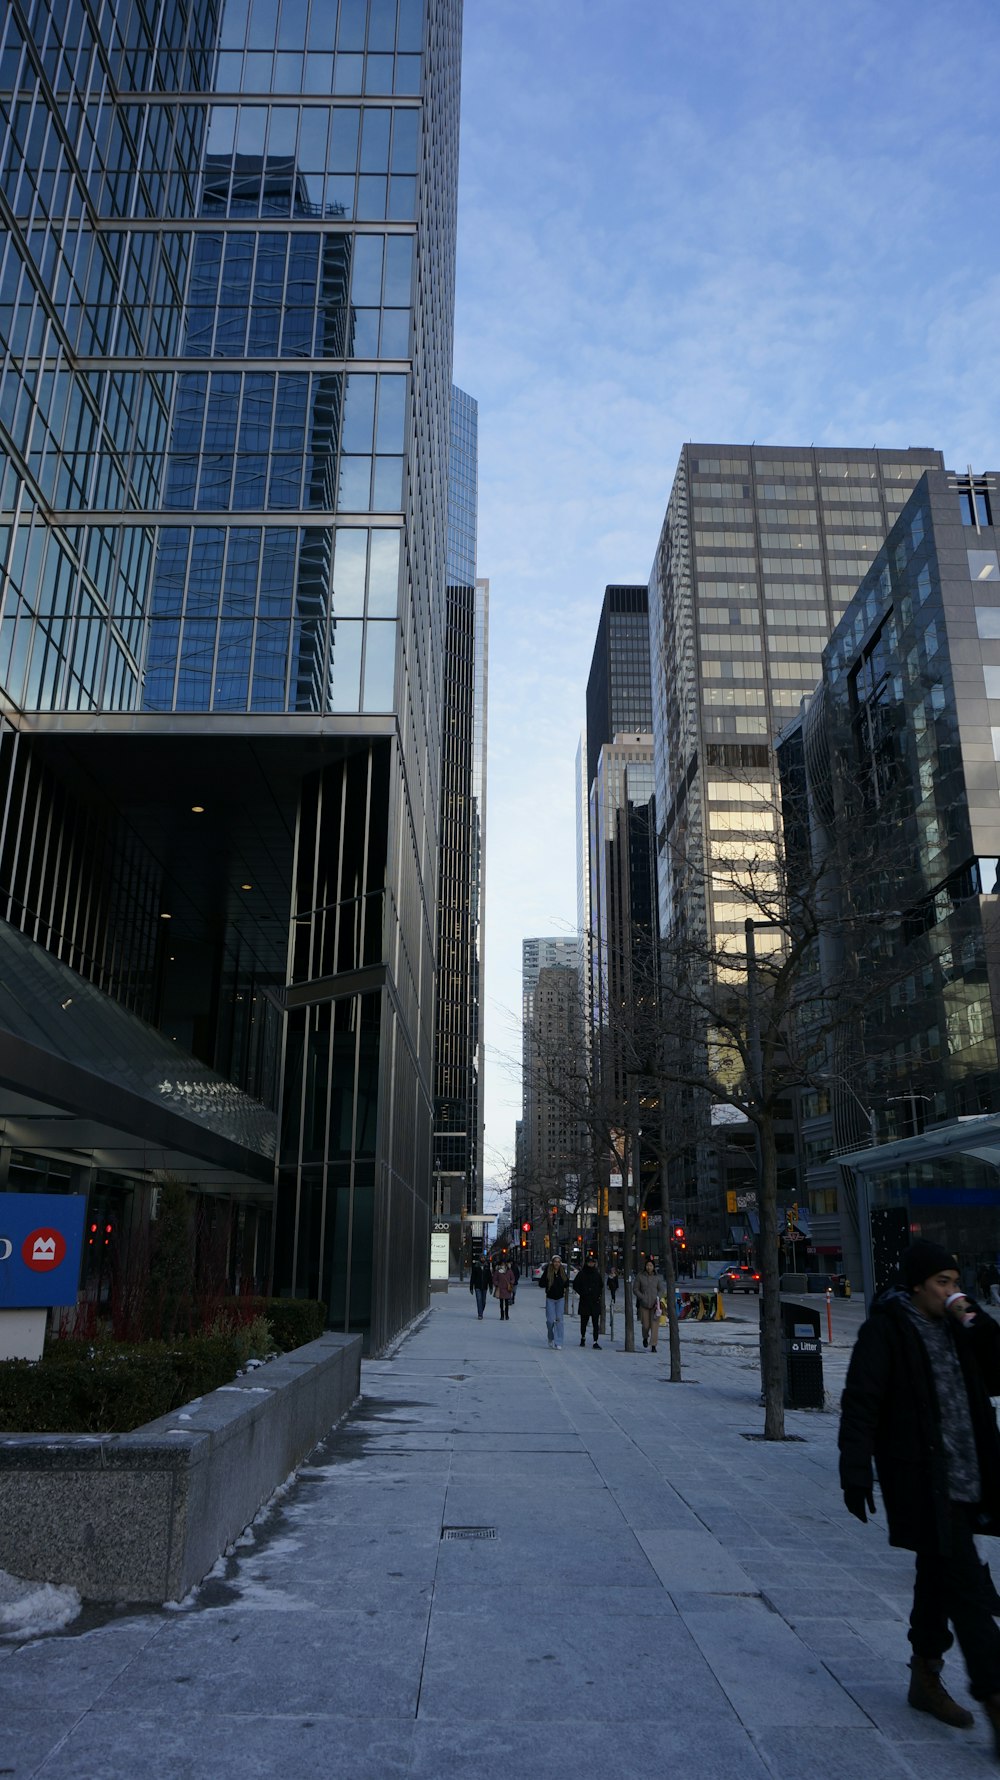 a group of people walking down a sidewalk next to tall buildings